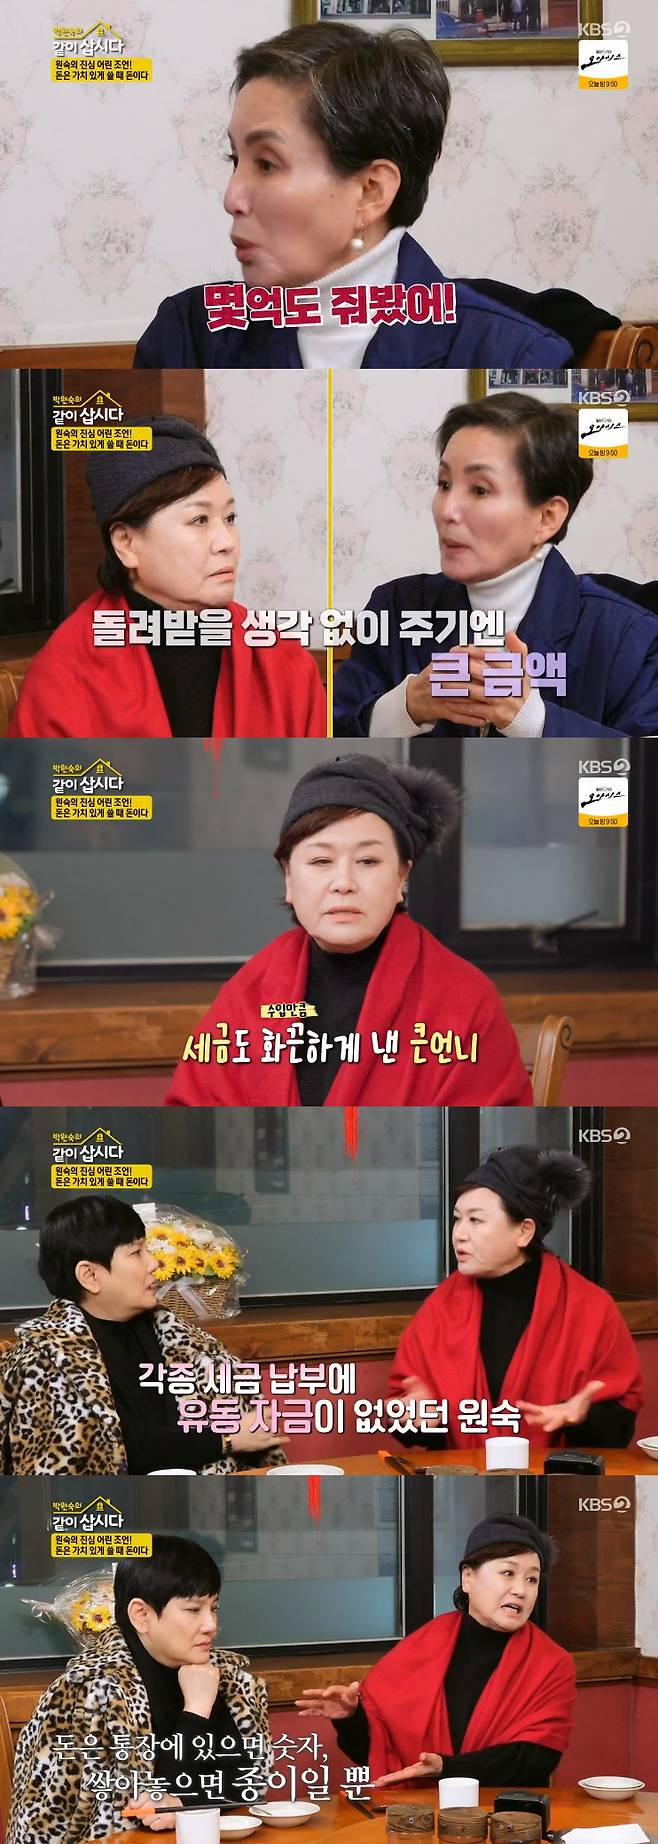 Lets live together Park Won-sook confided in a stupid anecdote that miscalculated the tax.On the 14th broadcast KBS2 Lets get together with Park Won-sook, Sisters who broke the old painting were featured.Hye Eun Yi said, We will break the seal in 2023, and said that we want to accept all of our coastal roads this year.Park Won-sook showed off her granddaughter as she walked along the coast.An mun-suk said, Isnt there something else to brag about? Didnt you say you got straight As? Park Won-sook said, I dont think you look like my grandmother, but she was pleased with her granddaughter.The Sisters went to a bakery where they had been for three generations and tasted milkshakes and bread, and Ahn So-young recalled, I made a lot of bread bets with my boyfriends. When I was a kid, I loved bread so much that I ate 10 of them in my seat.Ahn So-young said, I happened to know them when I was in the academy. Eight people told me to be an unchanging friend and that liking someone was a betrayal. I couldnt say who I liked. But to be honest, you know I actually liked you.I could not talk because I could not betray it, he continued.An mun-suk said, My house was not bad, but when my mother went down from Seoul to Gwangju, my acquaintances looked at me.I do not remember anything else, but the scars on the food are Memory, he said. It was huge to eat bananas because the family members live well.I do not know, but my sister cried, she said. I did not give it to her, but she threw the banana peel toward me. But the young girl scratched the skin with a spoon.The last place to break the old painting is a Chinese restaurant.After eating, Ahn So-young released an episode of United States of America. Ahn So-young said, I went to the United States of America and did a fur trade because I had nothing to do.When I think about it, I remember thinking, I saved money to buy a fur for the holidays and anniversaries. I mix up $ 1 and $ 10. I count the money and go to bed.An mun-suk said, Suddenly I thought, How much do you lend me if you ask me to borrow money because a close person is in a hurry? Ahn So-young said, I do not think I lend.I think I give it because I am sorry when I can not get the money back if I lend it.  I gave a few hundred million. I did not lend it, but I ended up giving it. I did not know it was hard at the time.At that time, it was too ironic. An mun-suk asked, Do you still have contact with him? And Ahn So-young said, Dead. Park Won-sook recalled that she had borrowed money from her best friend. Park Won-sook recalled, I made a lot last year, but I also paid a few hundred million in taxes.The opponent is actor Oh Mi-yeon. Oh Mi-yeon has said that he lent 60 million won to Park Won-sook.Park Won-sook said, I was so distracted after paying the tax. I was relieved at the end of the year, but the bill came in. I did not have any money because I made a mistake in my calculations.I would not have been able to stand up even if it was hard, he said to Oh Mi-yeon.He added, What I realized after experiencing difficulties is that money is a number if its in a bankbook. If you stack it up, its a pile of paper. Its money when you spend it, and I think I should spend it wisely.